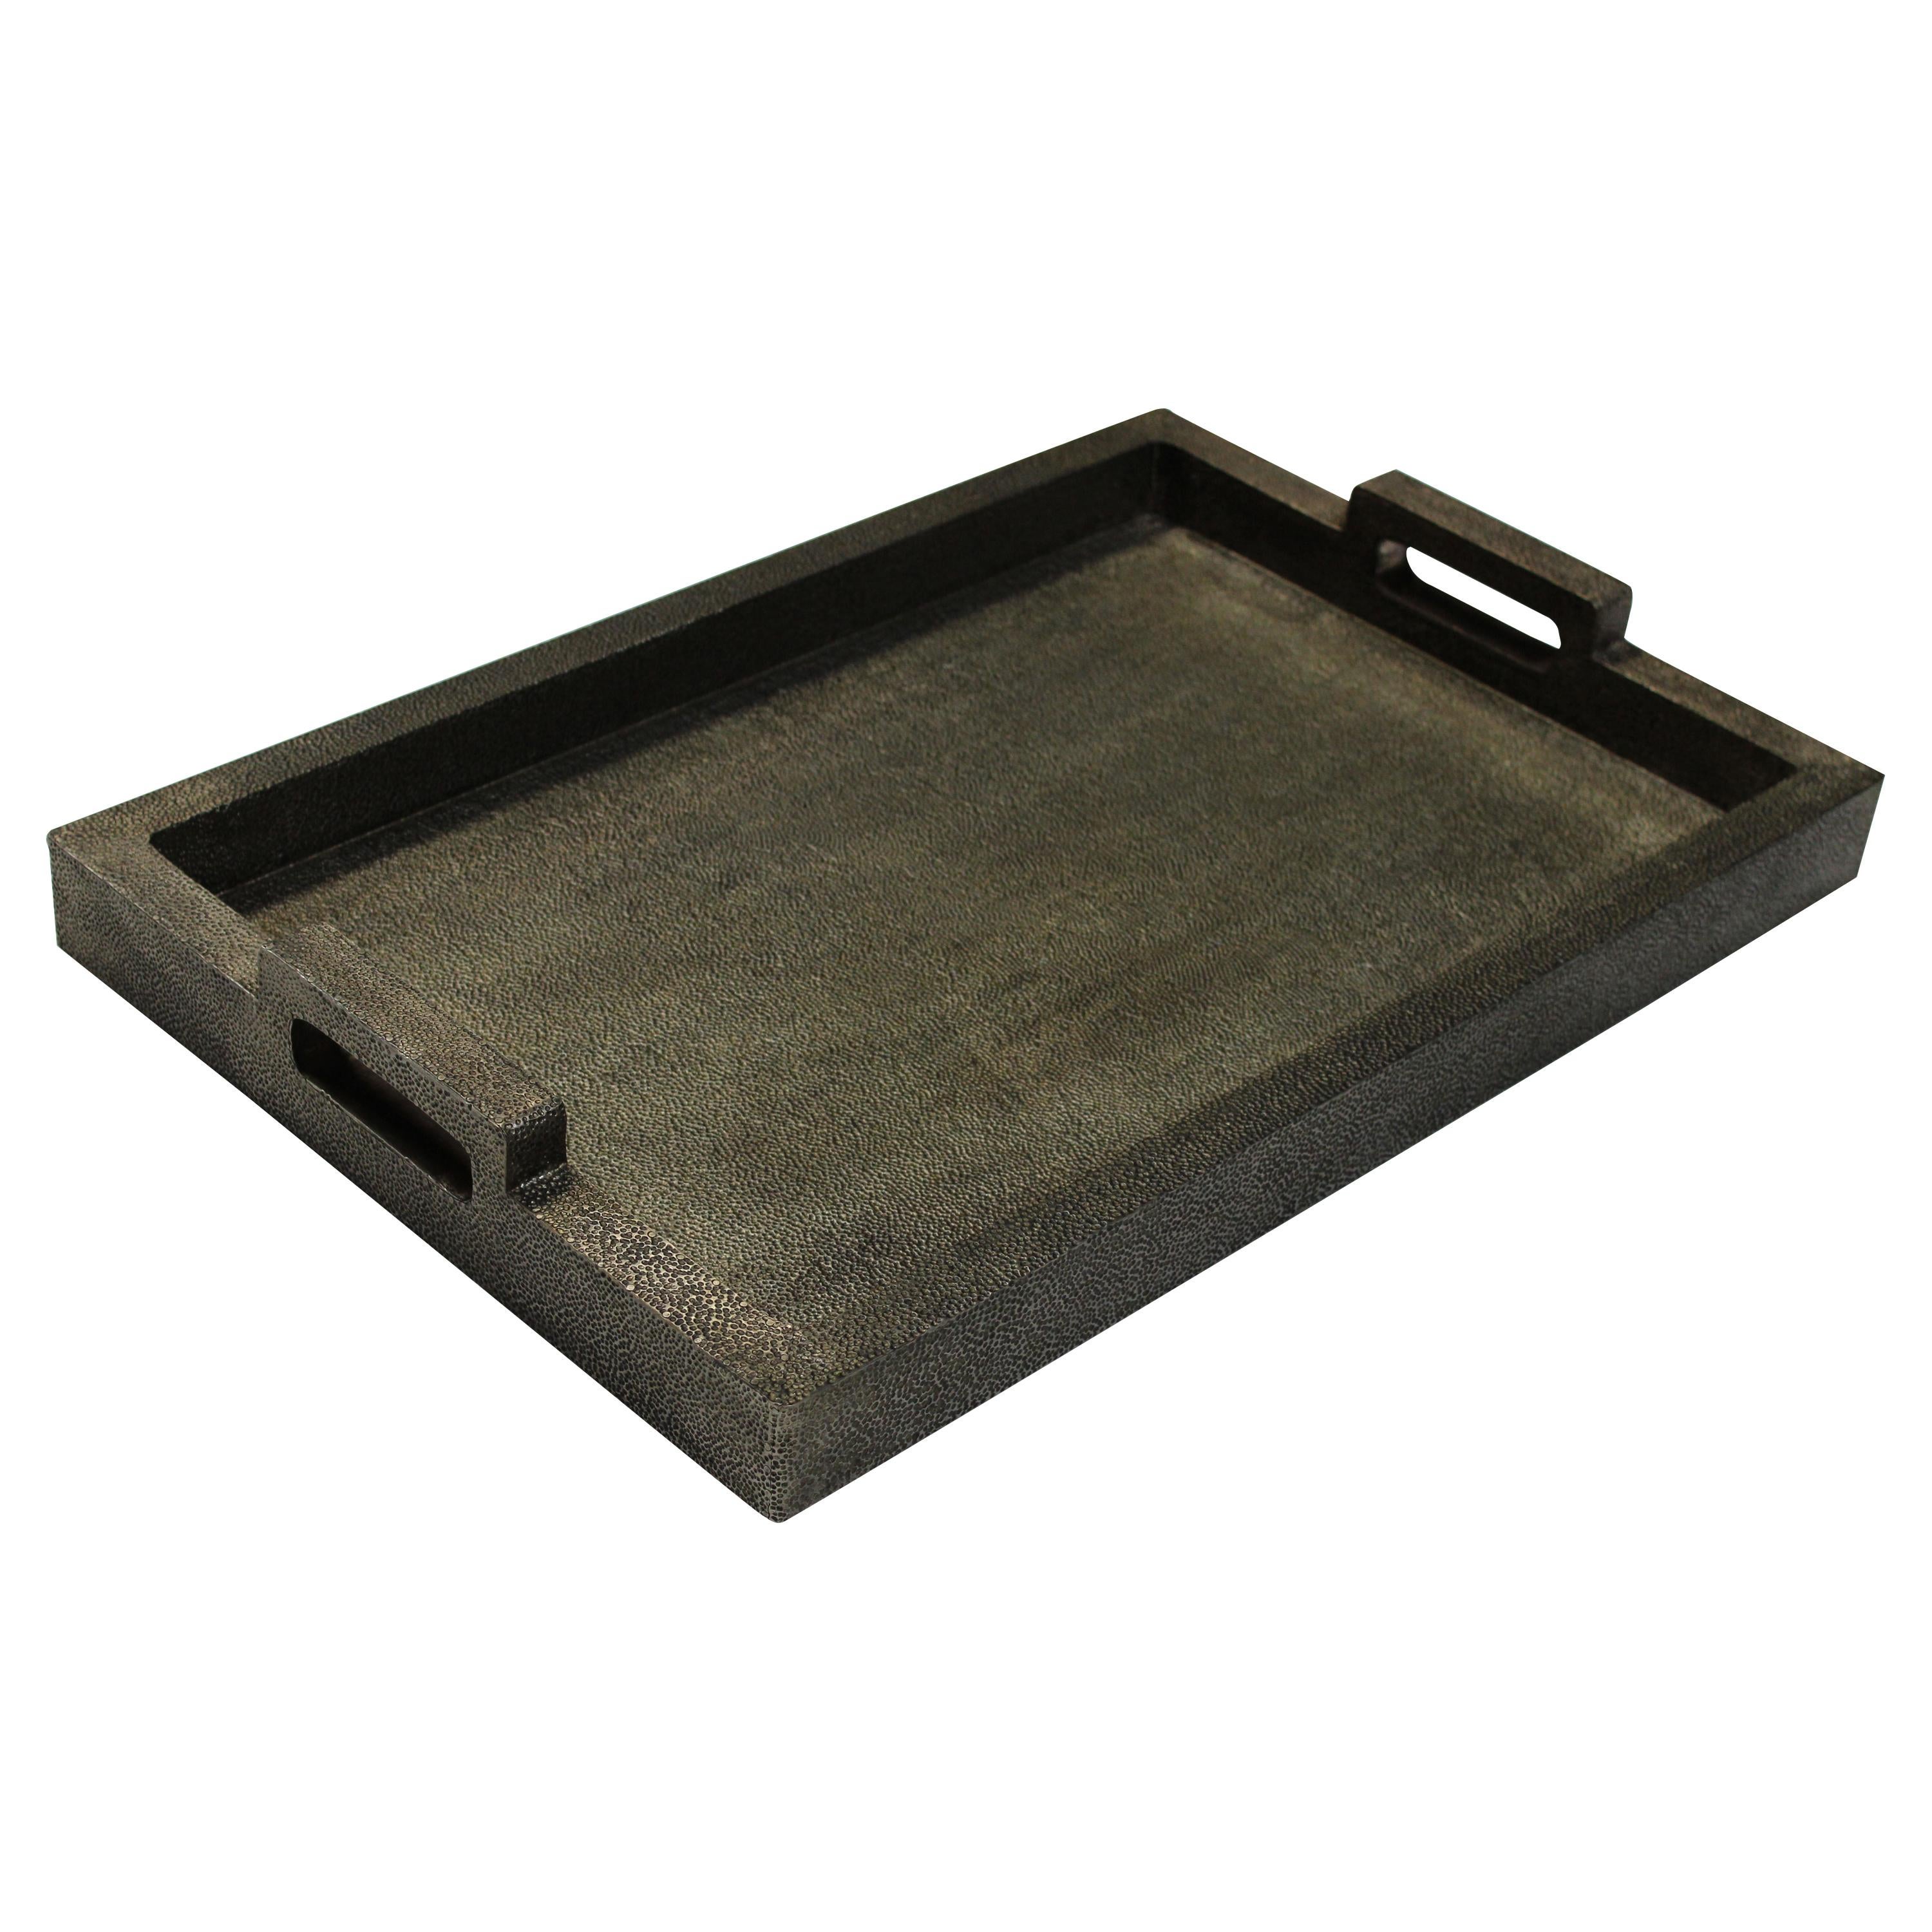 Rectangular Metal Tray in Antique Bronze Clad Over MDF by Stephanie Odegard For Sale